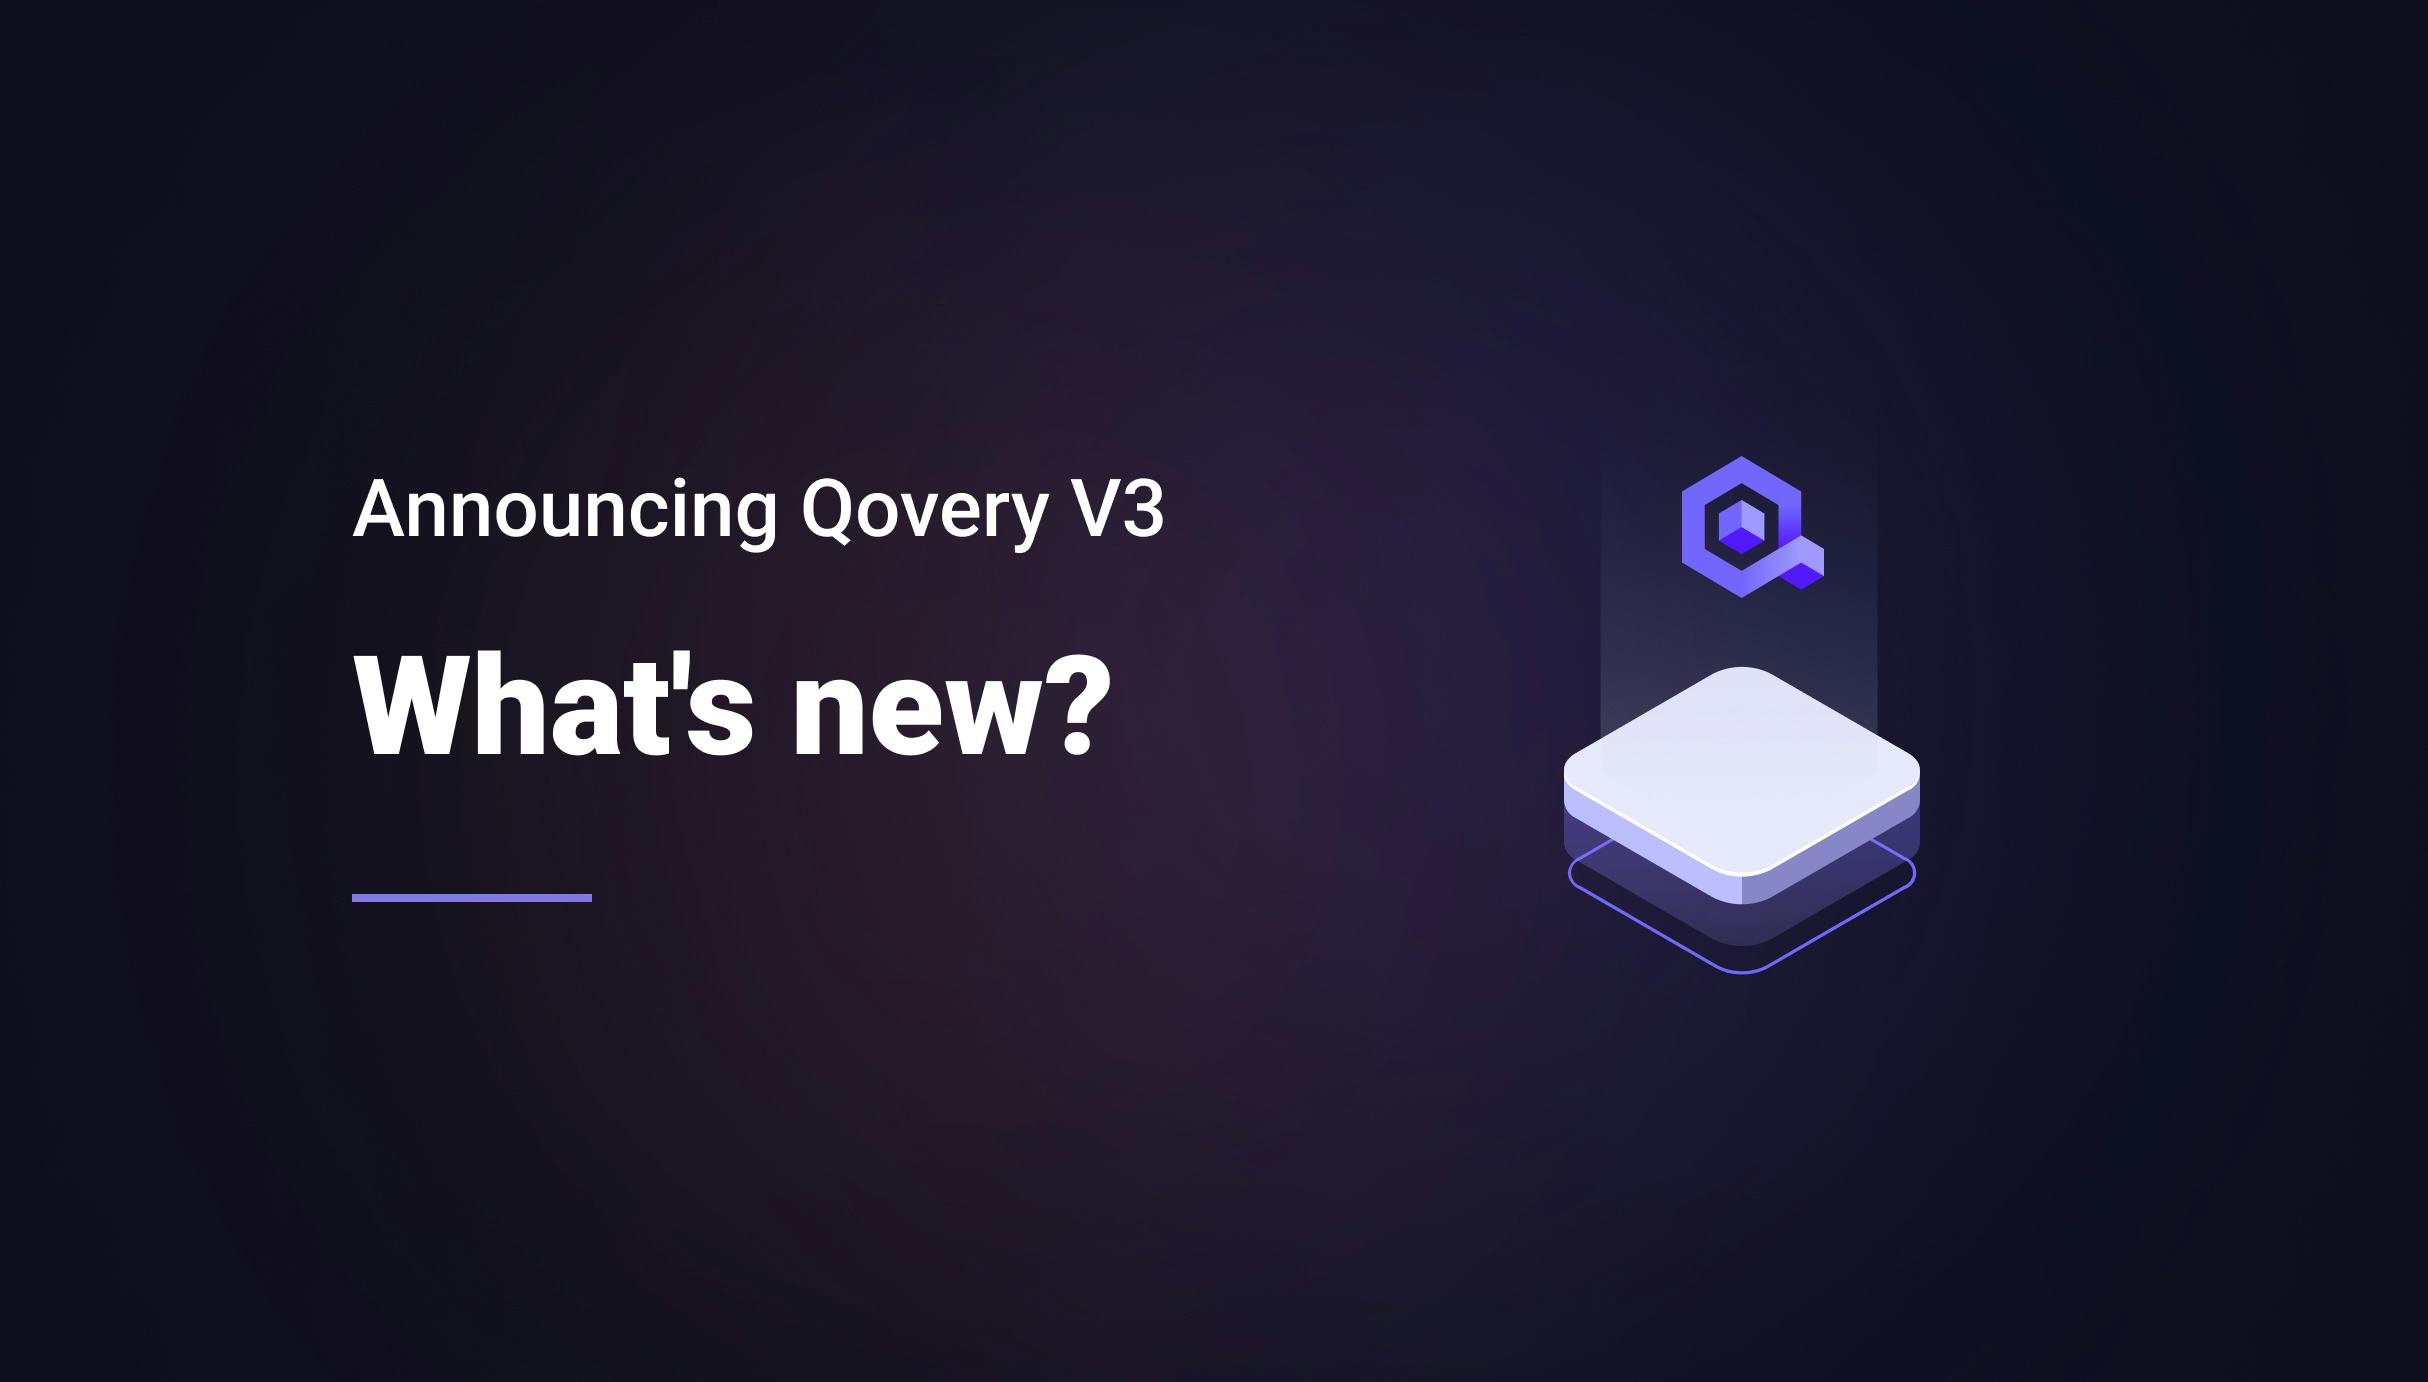 Announcing Qovery V3: What's new?